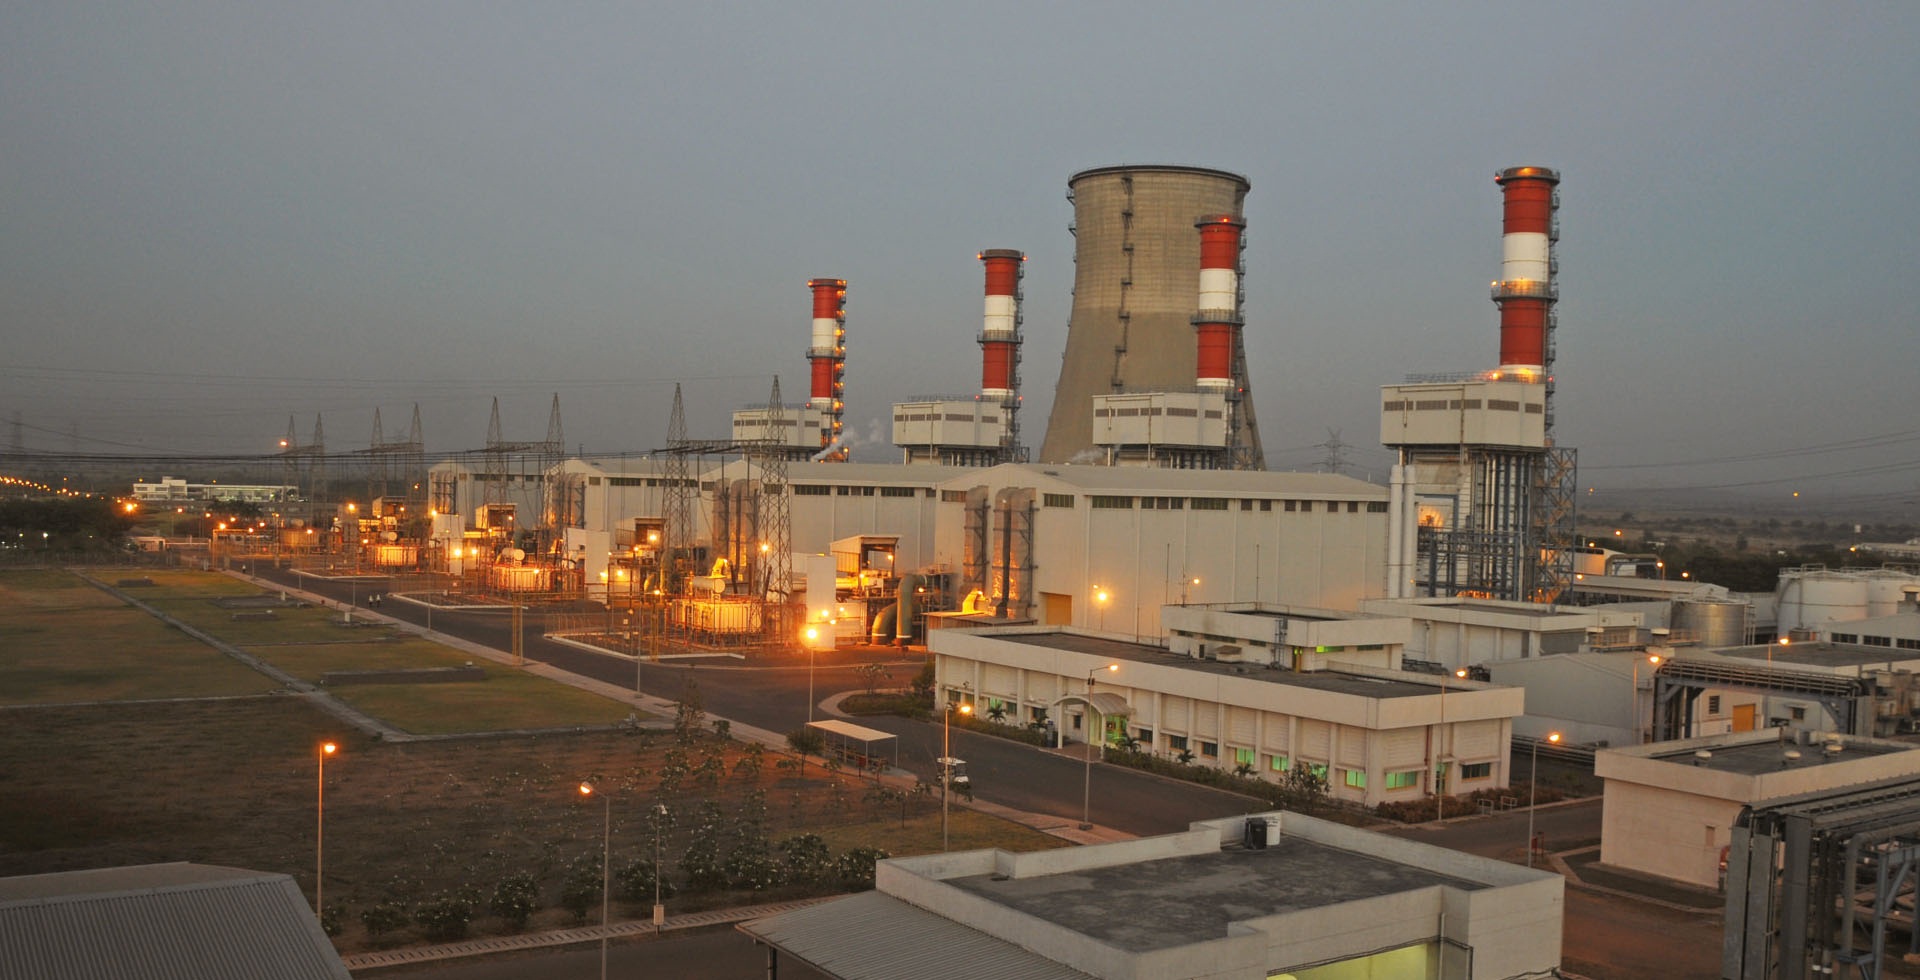 India's Torrent Power seeking March LNG cargo